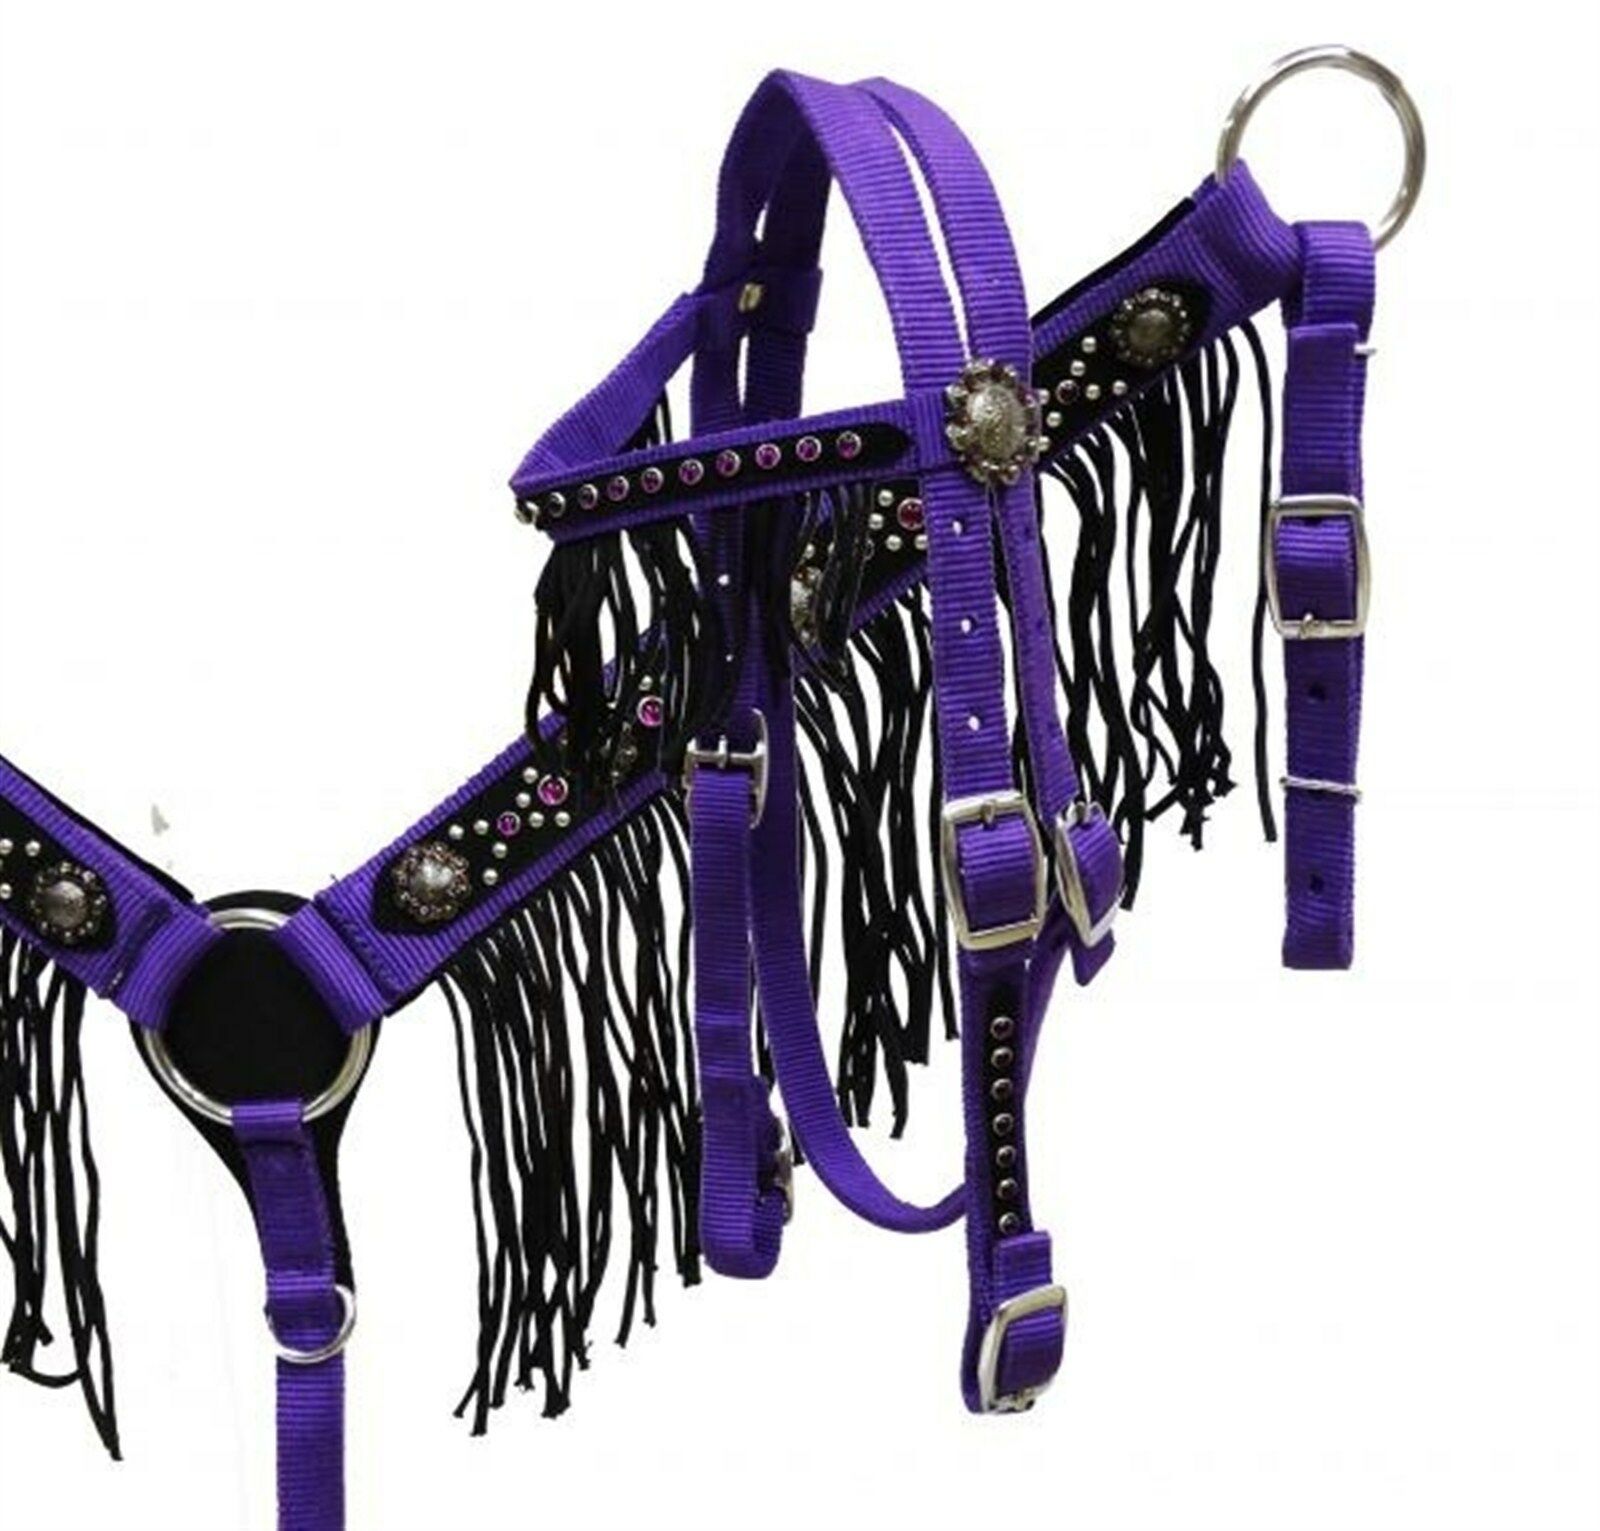 YOUTH Size Pair Of PURPLE Glitter Overlay Leather Western Spur Straps 